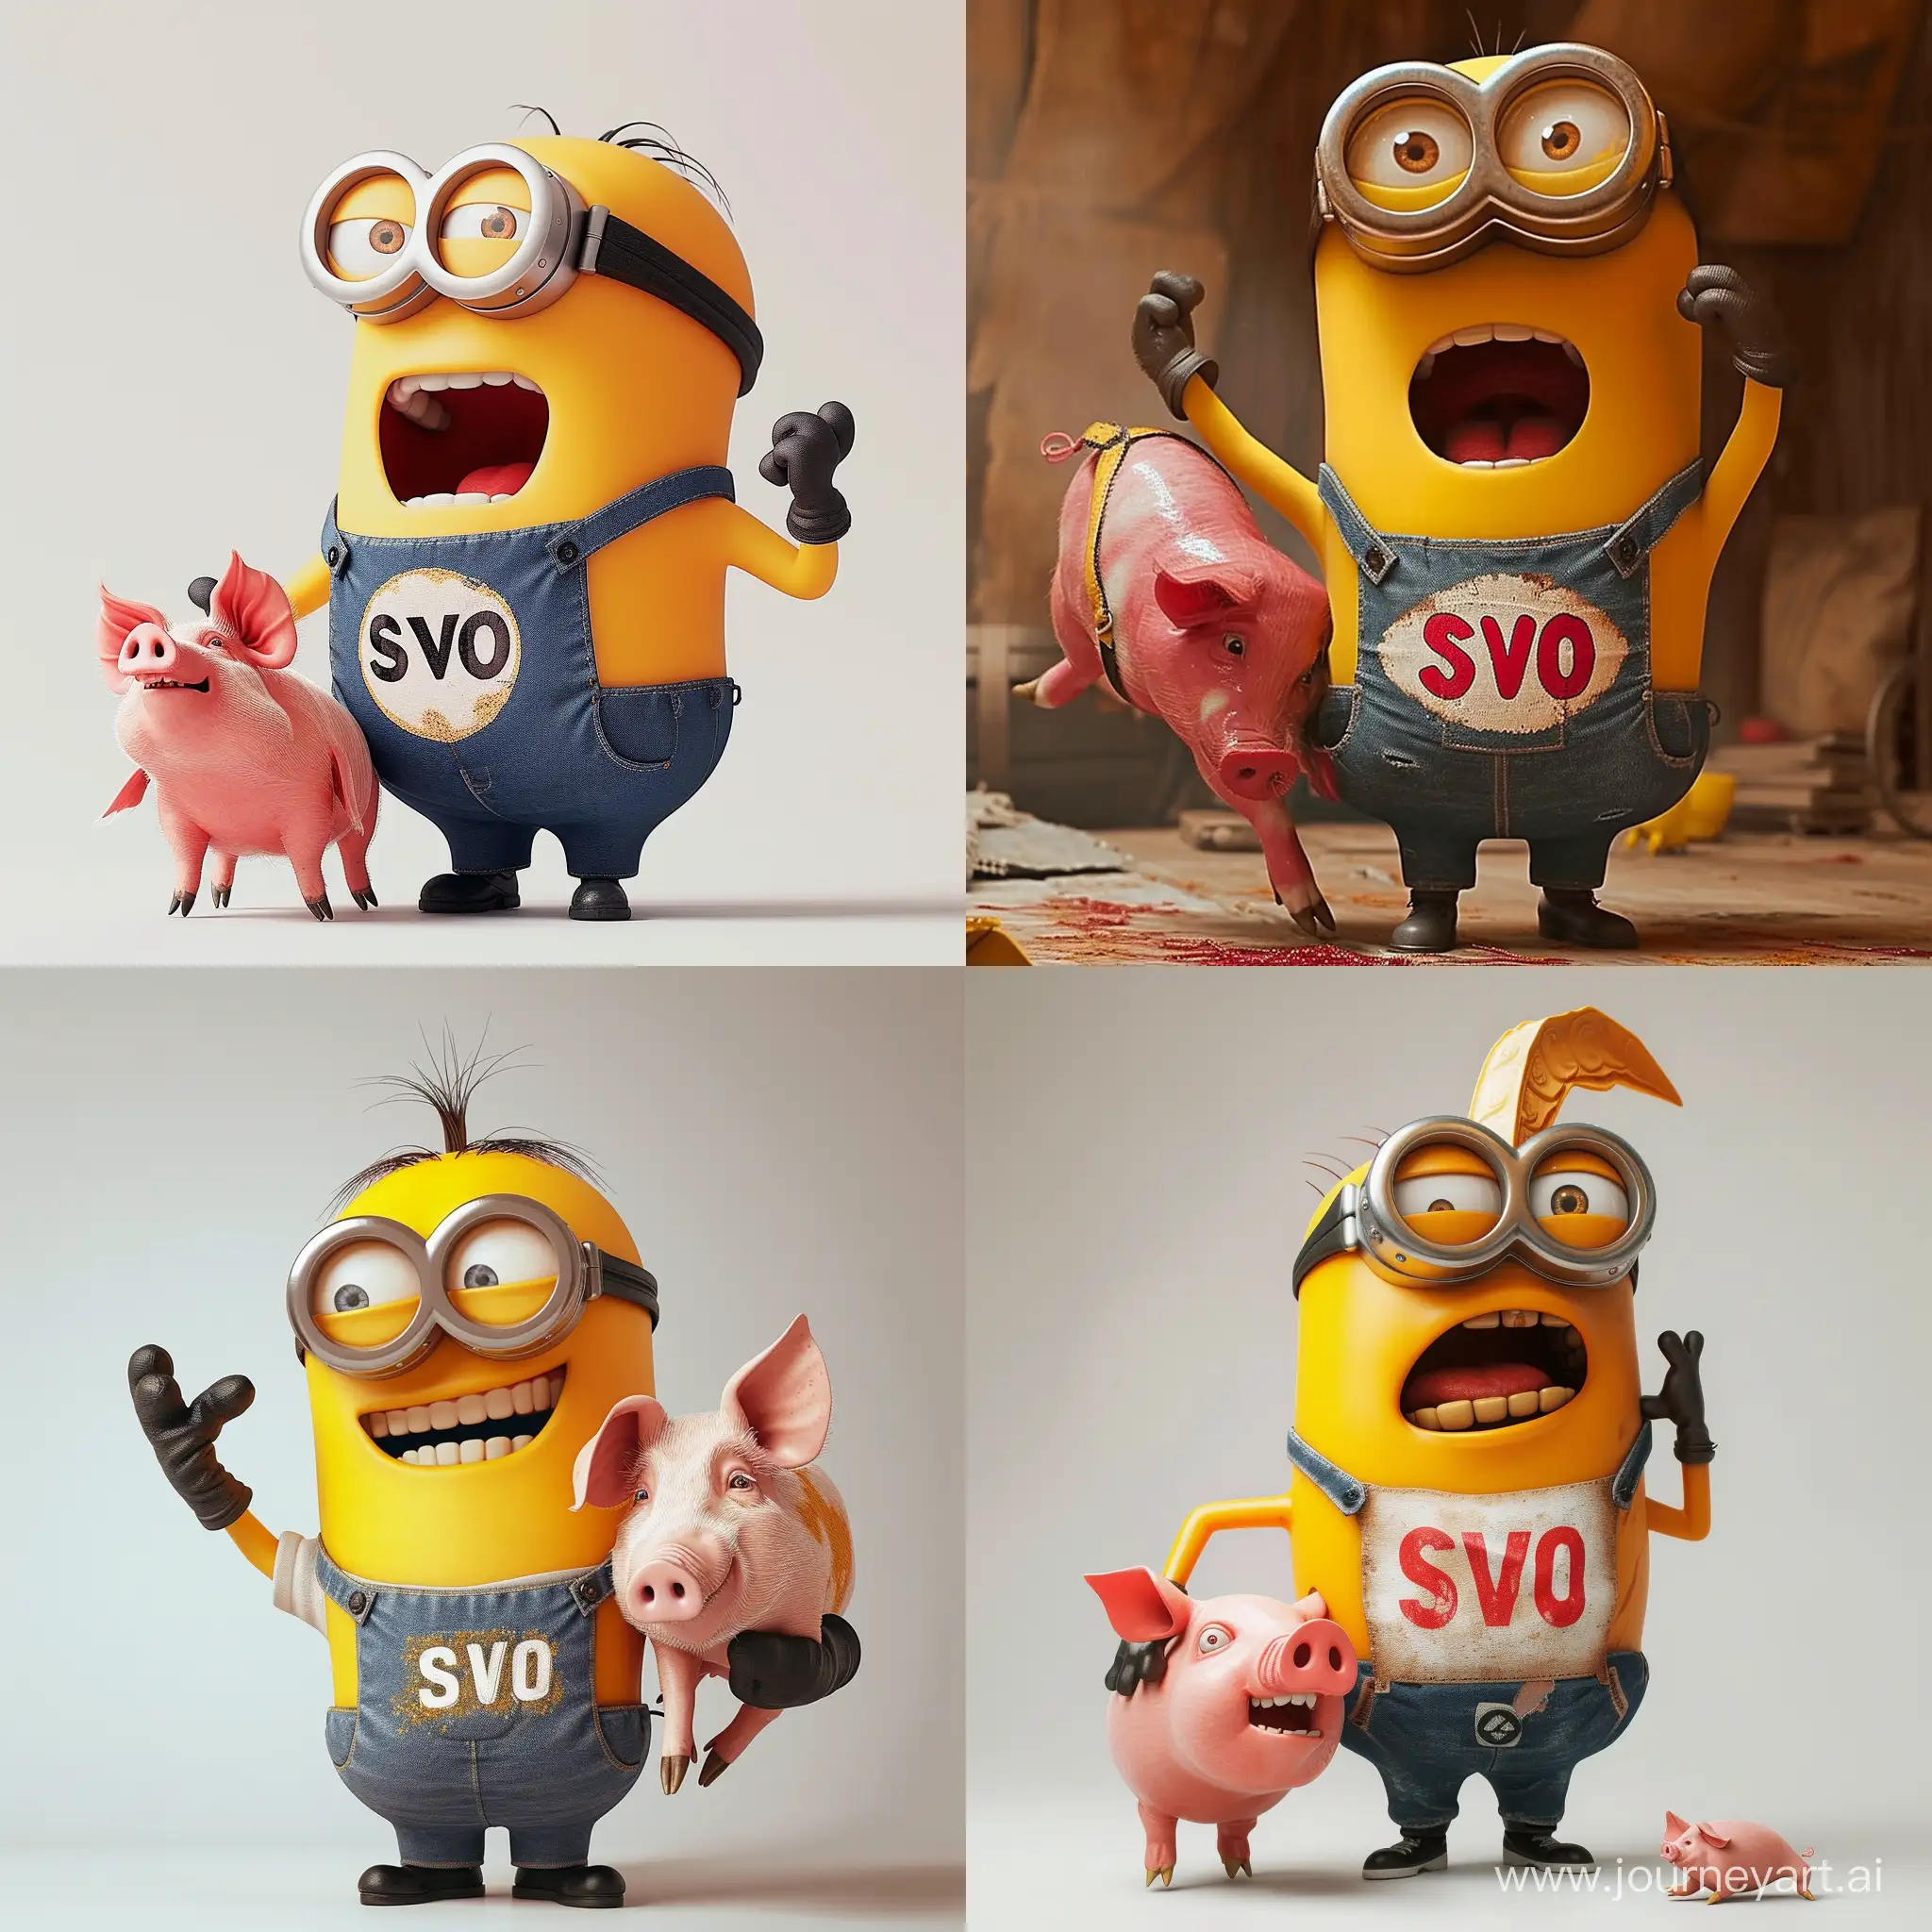 Energetic-Minion-in-SVO-TShirt-Playfully-Holding-a-Pig